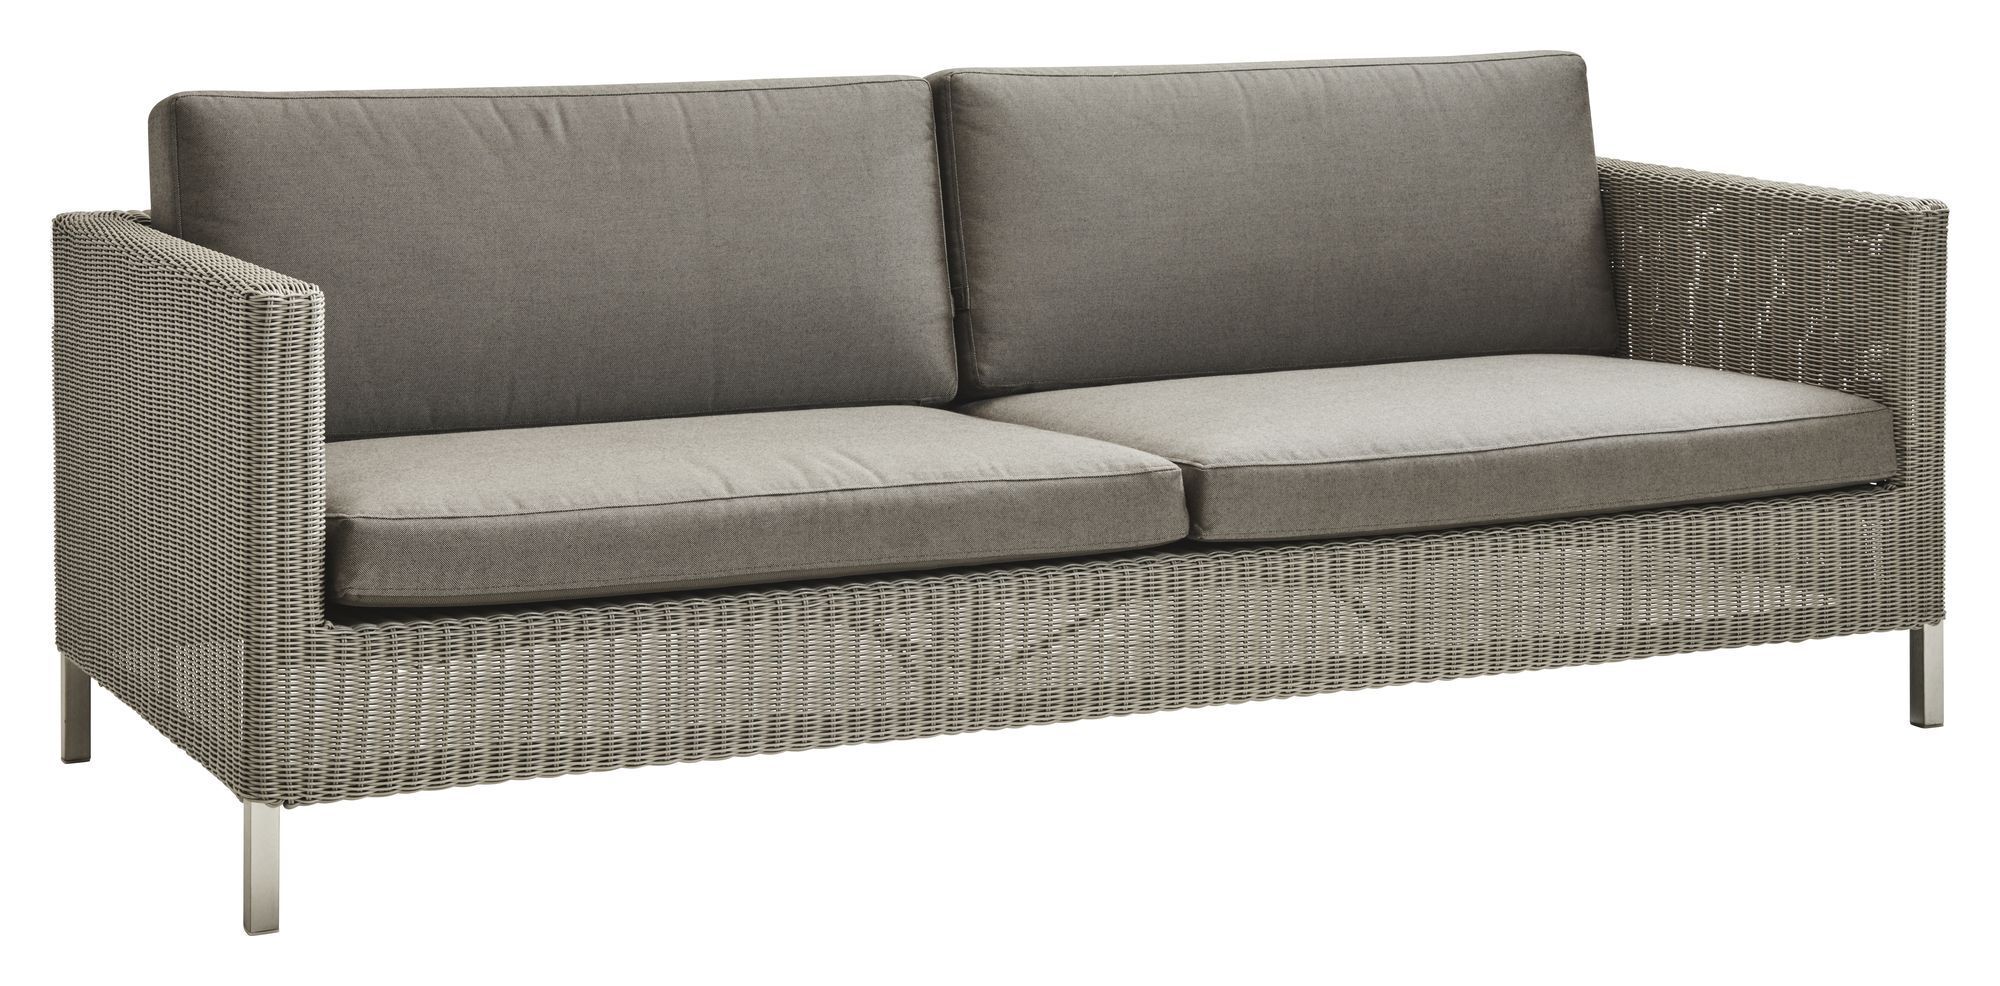 Cane-line Connect 3-pers. sofa putesett, Taupe   Unoliving